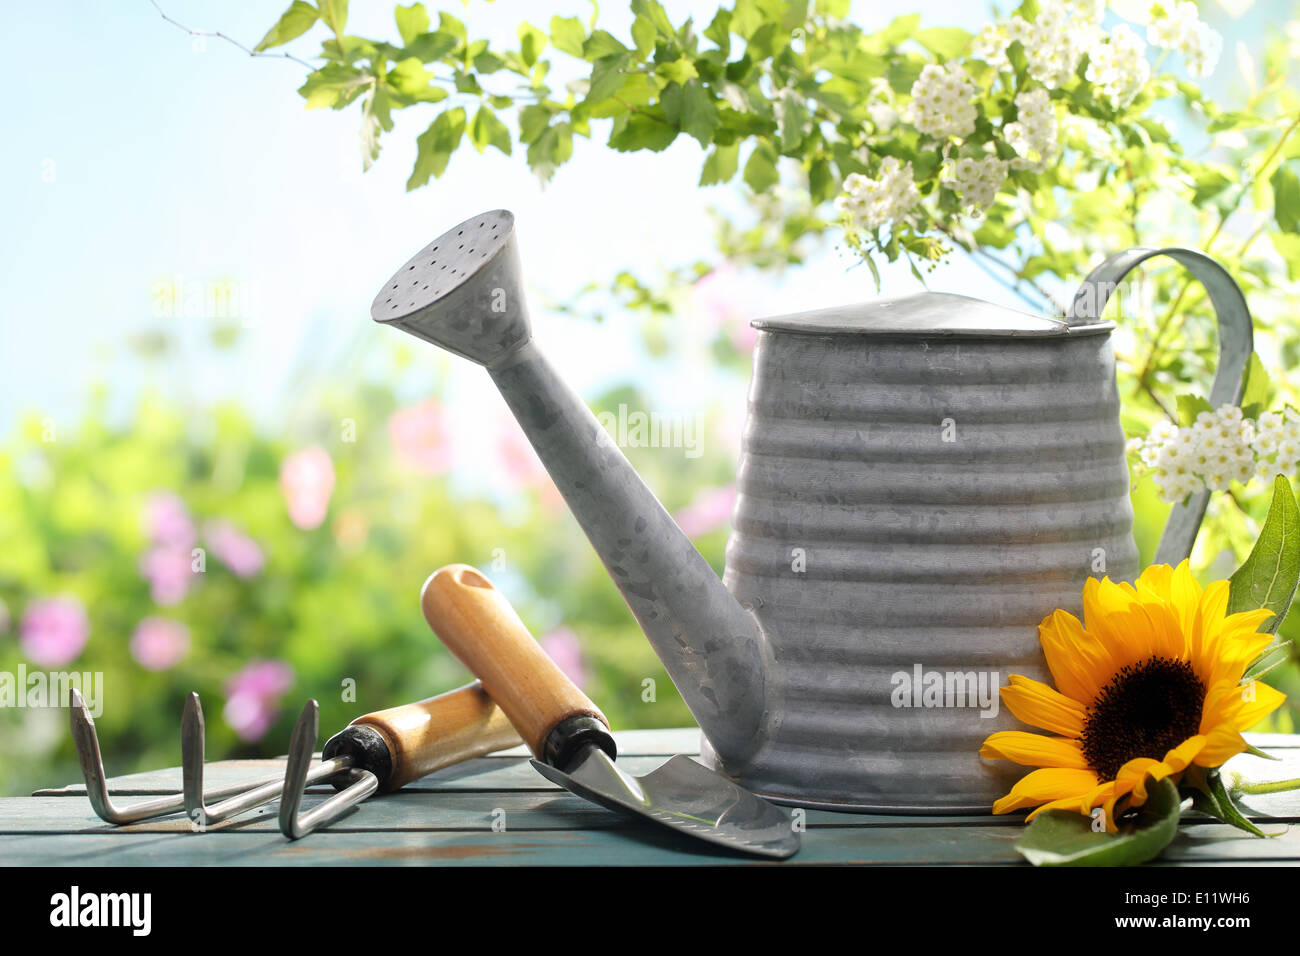 Outdoor gardening tools and flowers Stock Photo